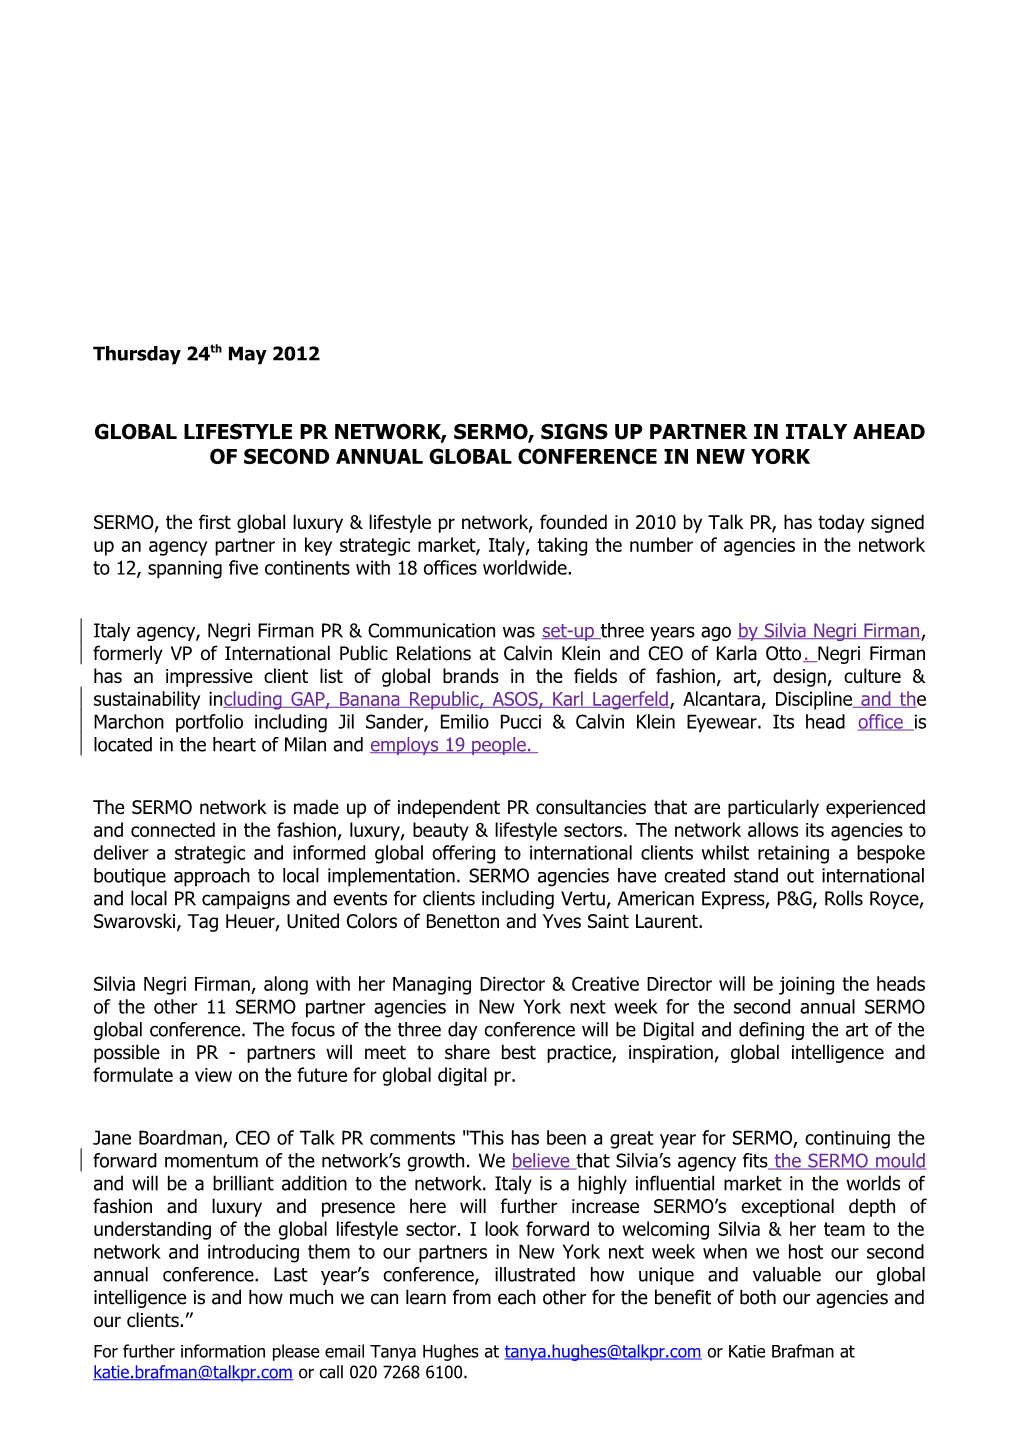 Global Lifestyle Pr Network, Sermo, Signs up Partner in Italy Ahead of Second Annual Global